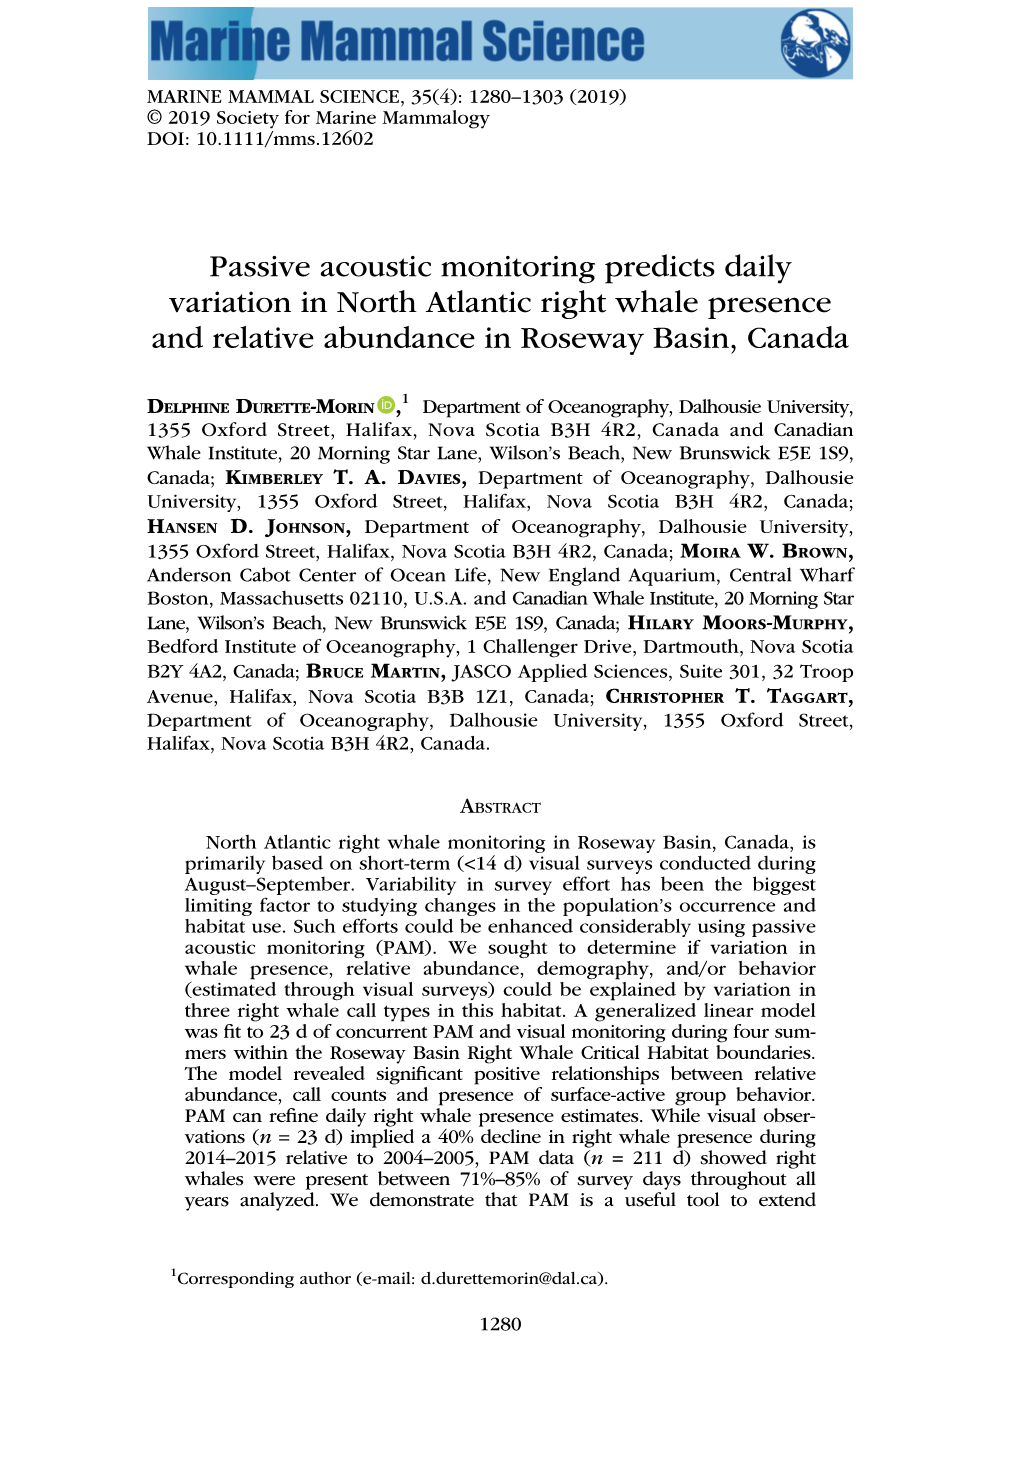 Passive Acoustic Monitoring Predicts Daily Variation in North Atlantic Right Whale Presence and Relative Abundance in Roseway Basin, Canada